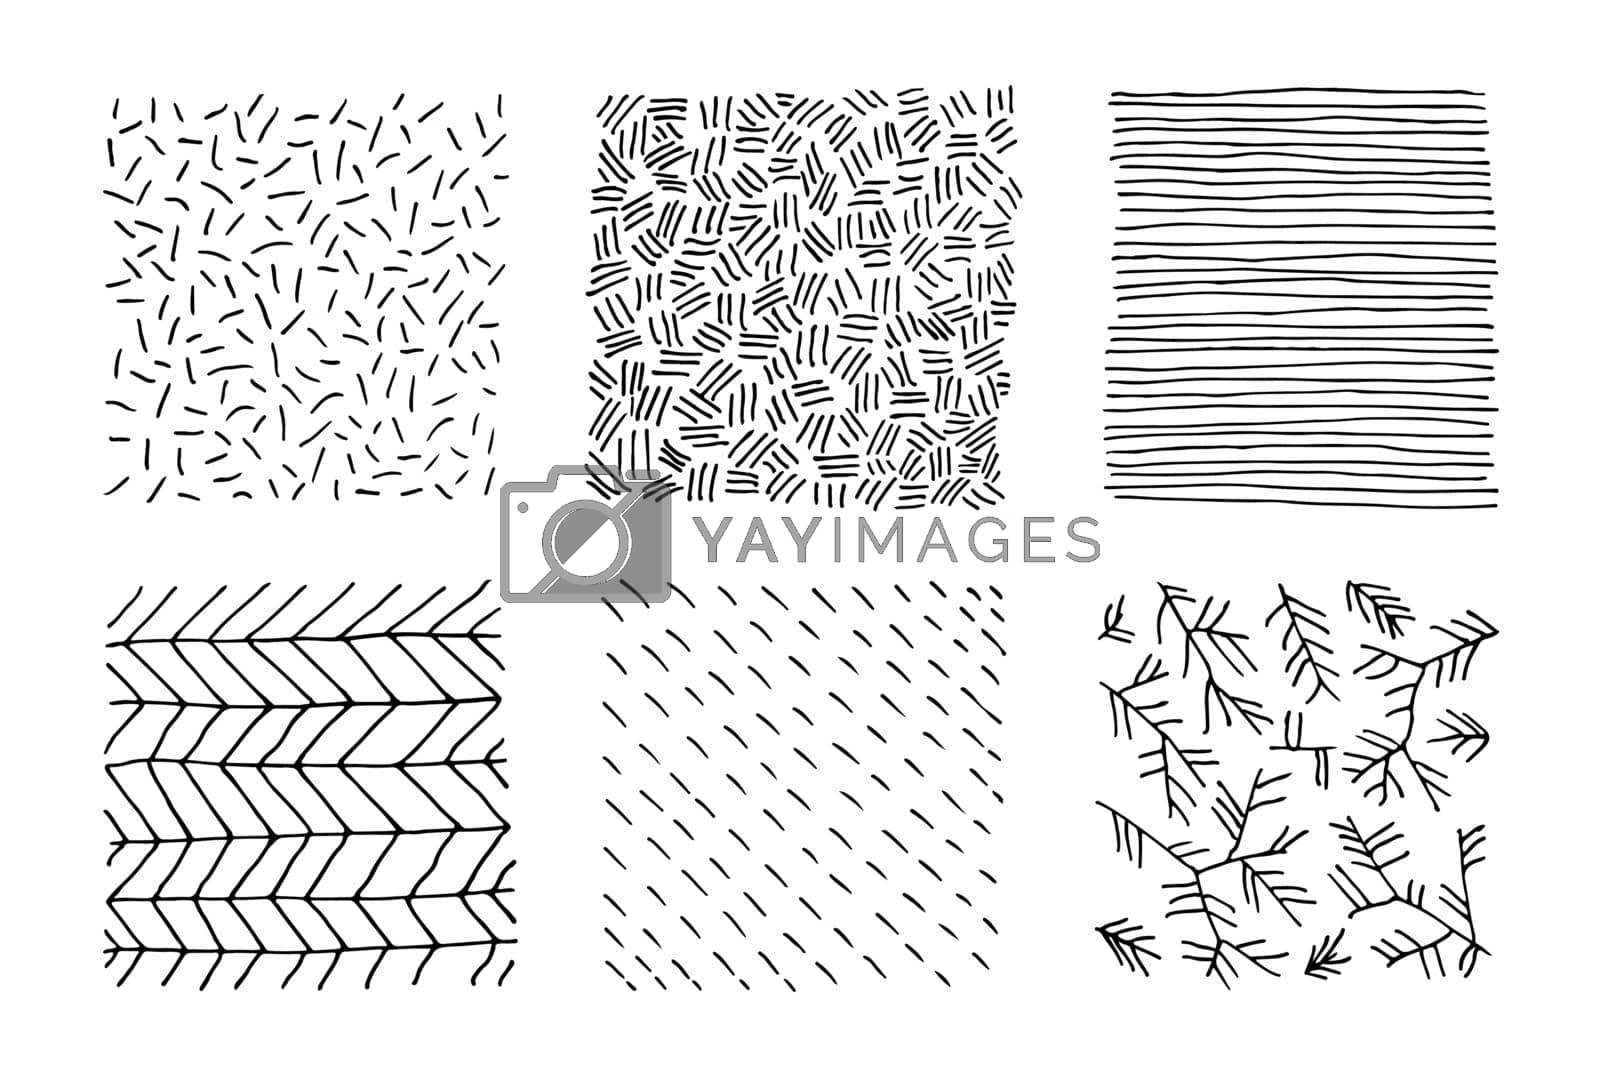 Royalty free image of Set of hand-drawn black and white textures by Pakaliuyeva